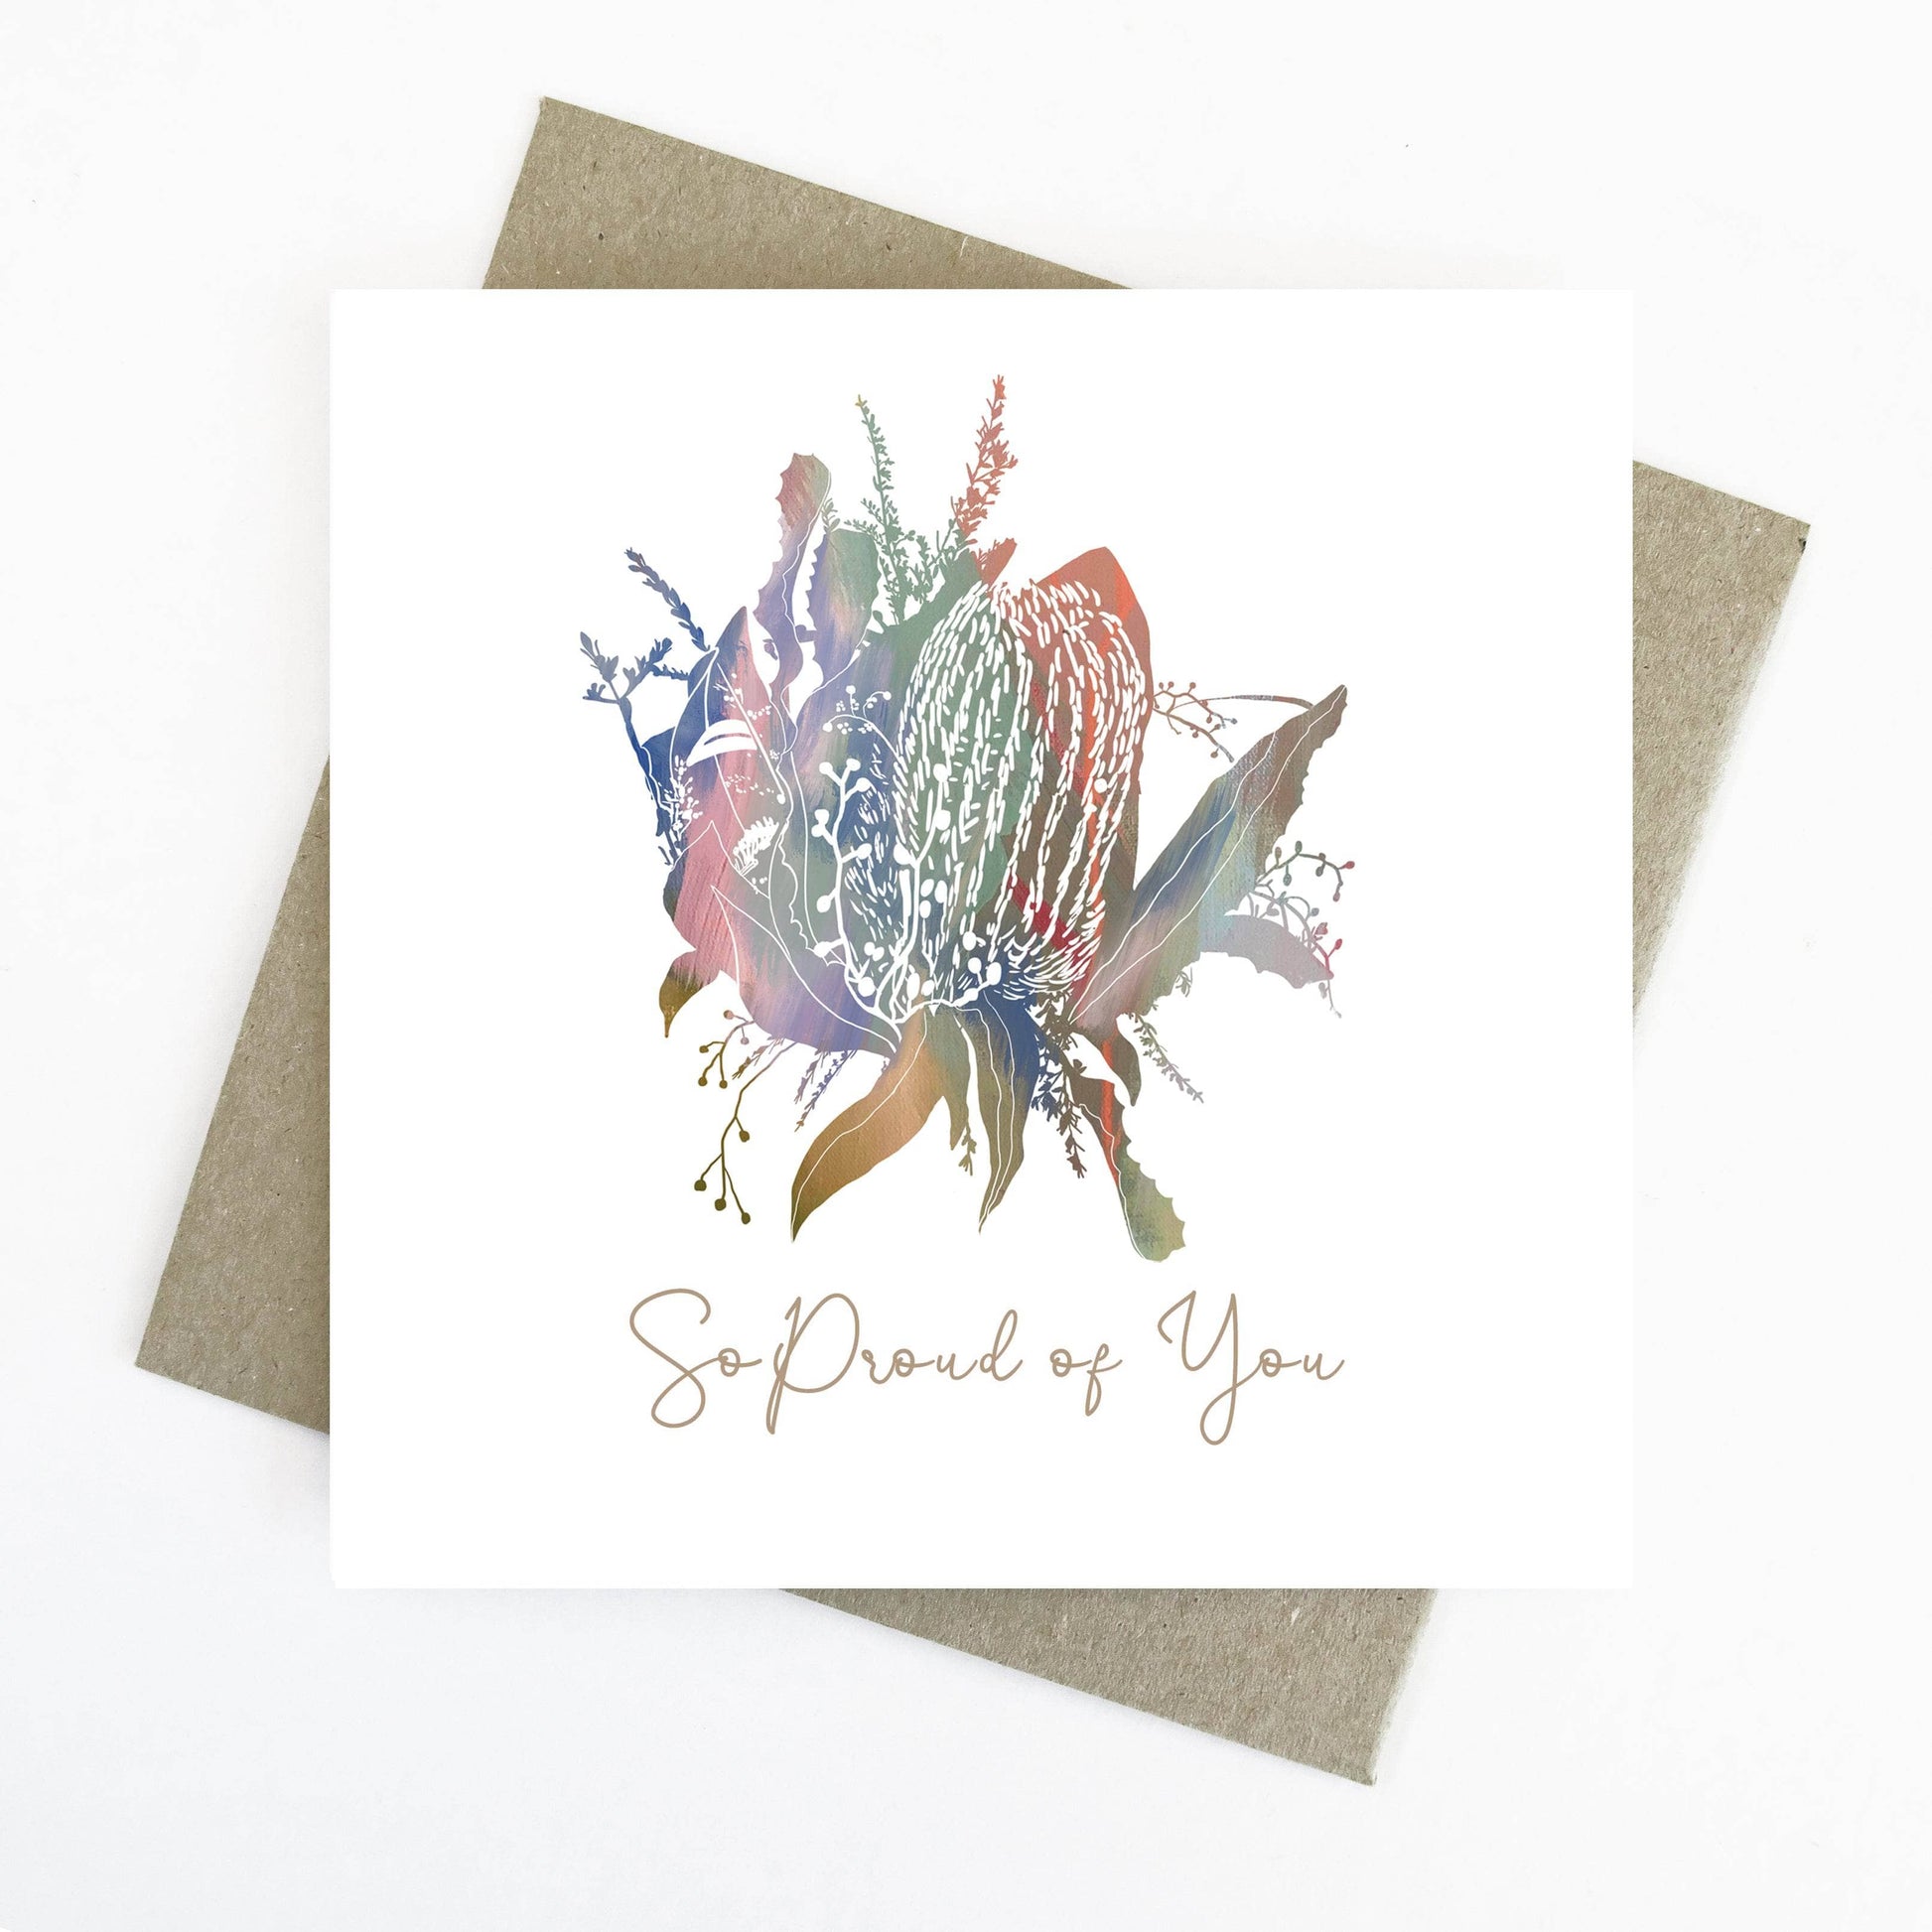 So Proud of You - Wildflower Greeting Card